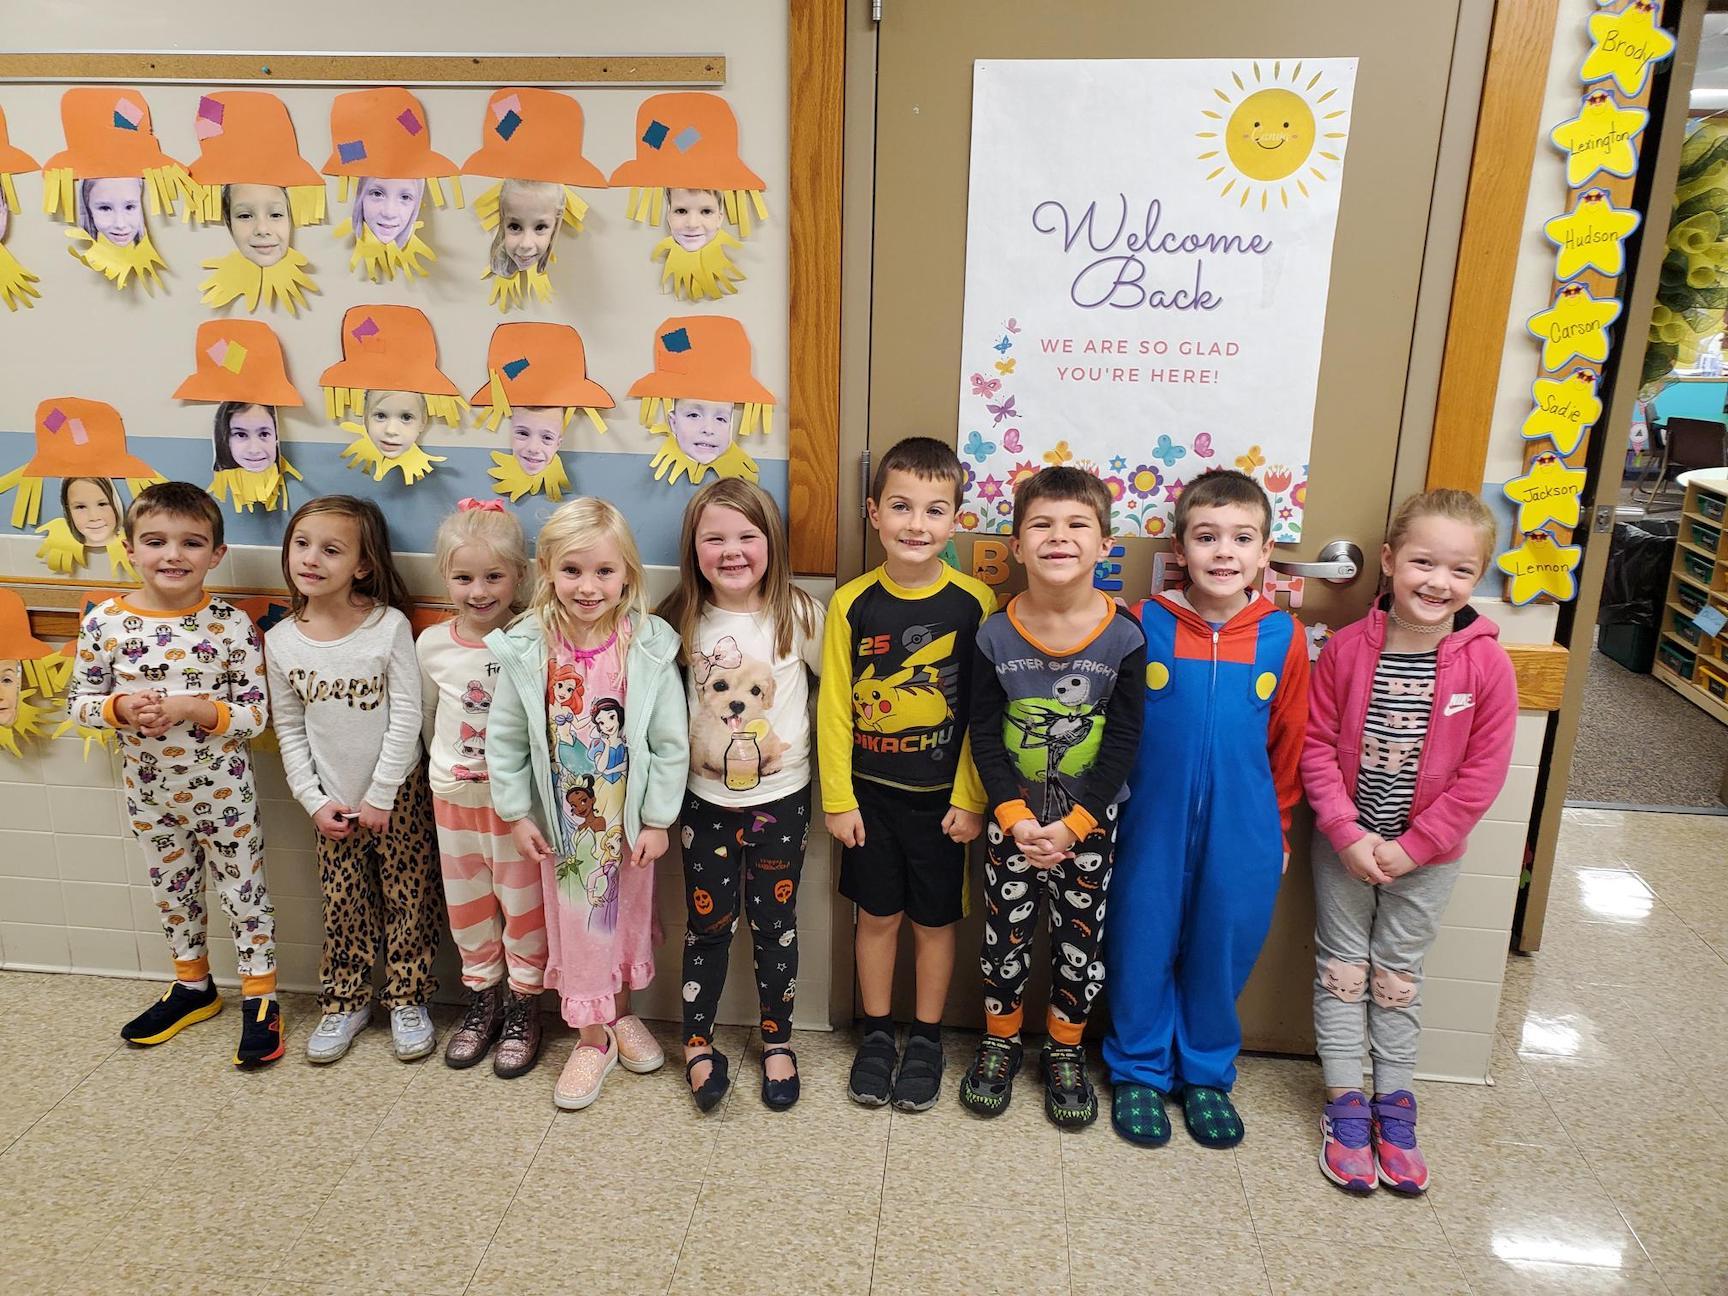 At Sunrise Elementary, Monday was pajama day with the message “Follow Your Dreams… Don’t do drugs”; here are some of the afternoon kindergarten students dressed in their PJs